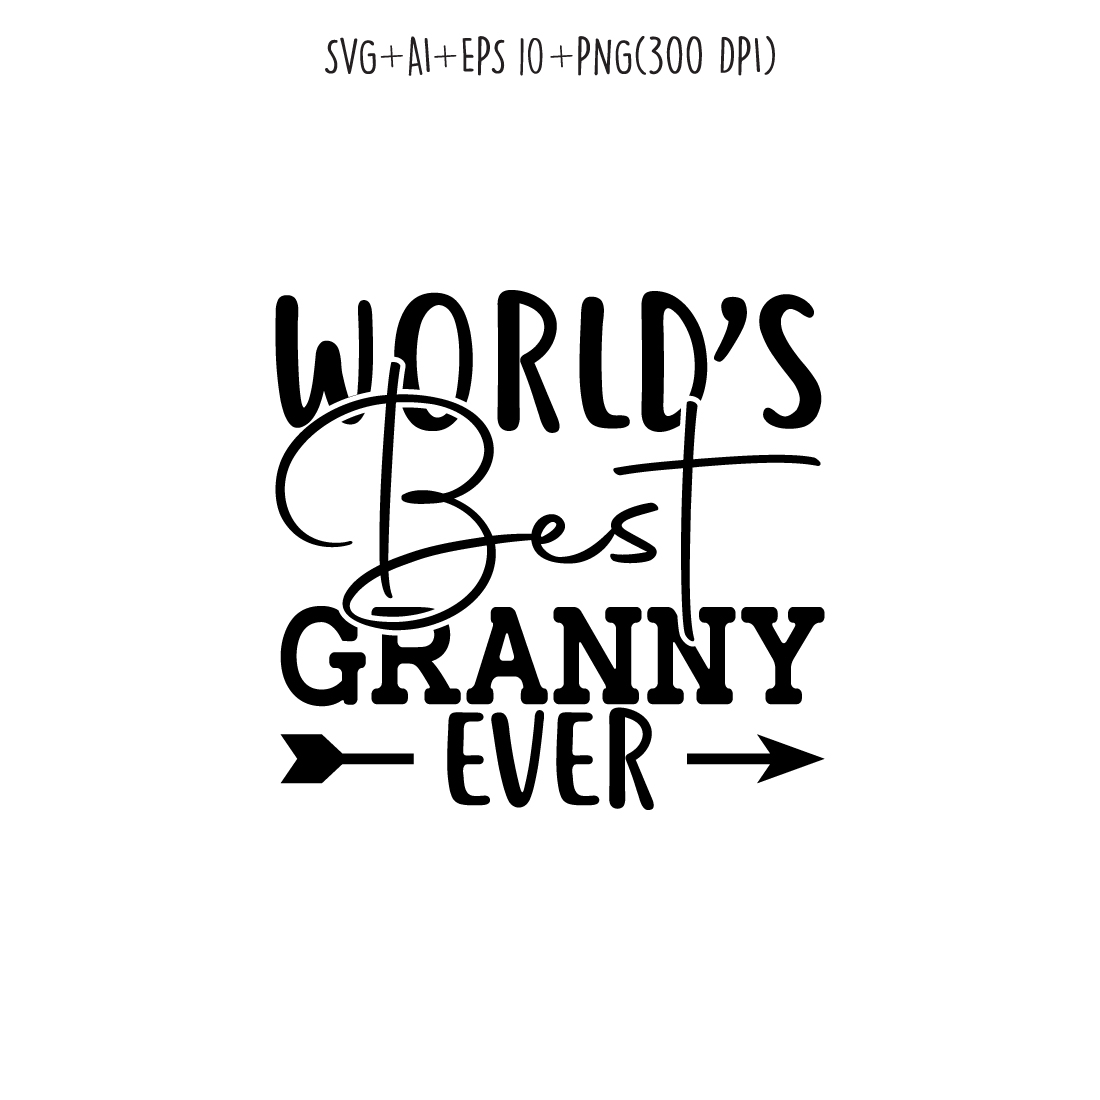 world's best granny ever SVG design for t-shirts, cards, frame artwork, phone cases, bags, mugs, stickers, tumblers, print, etc cover image.